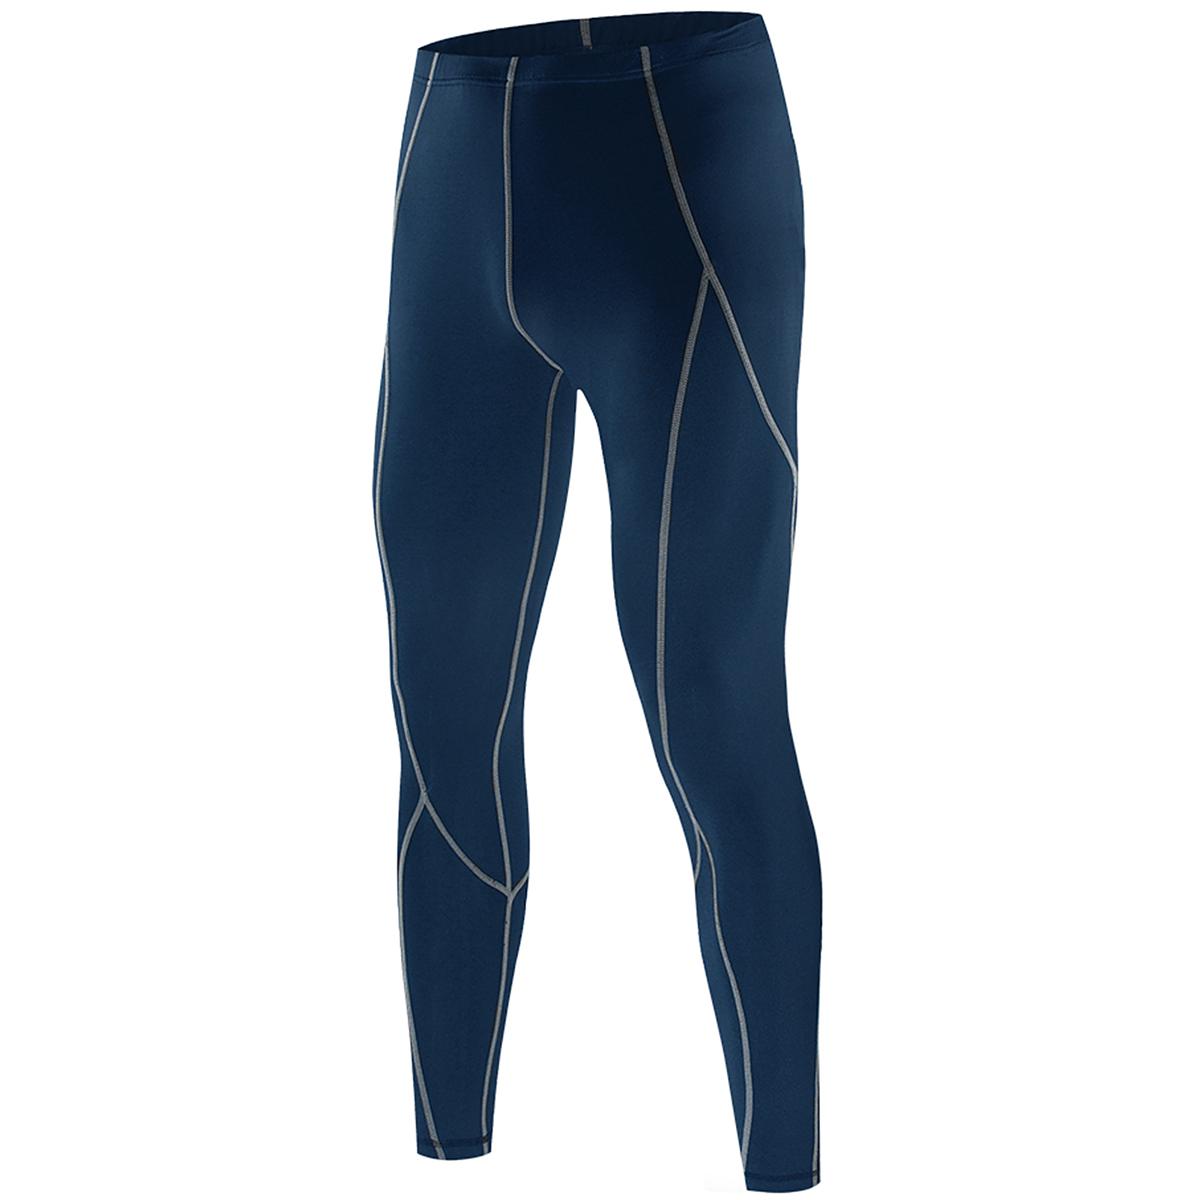 Men's Compression Pants for sale in Ghoshail, Dhaka, Bangladesh